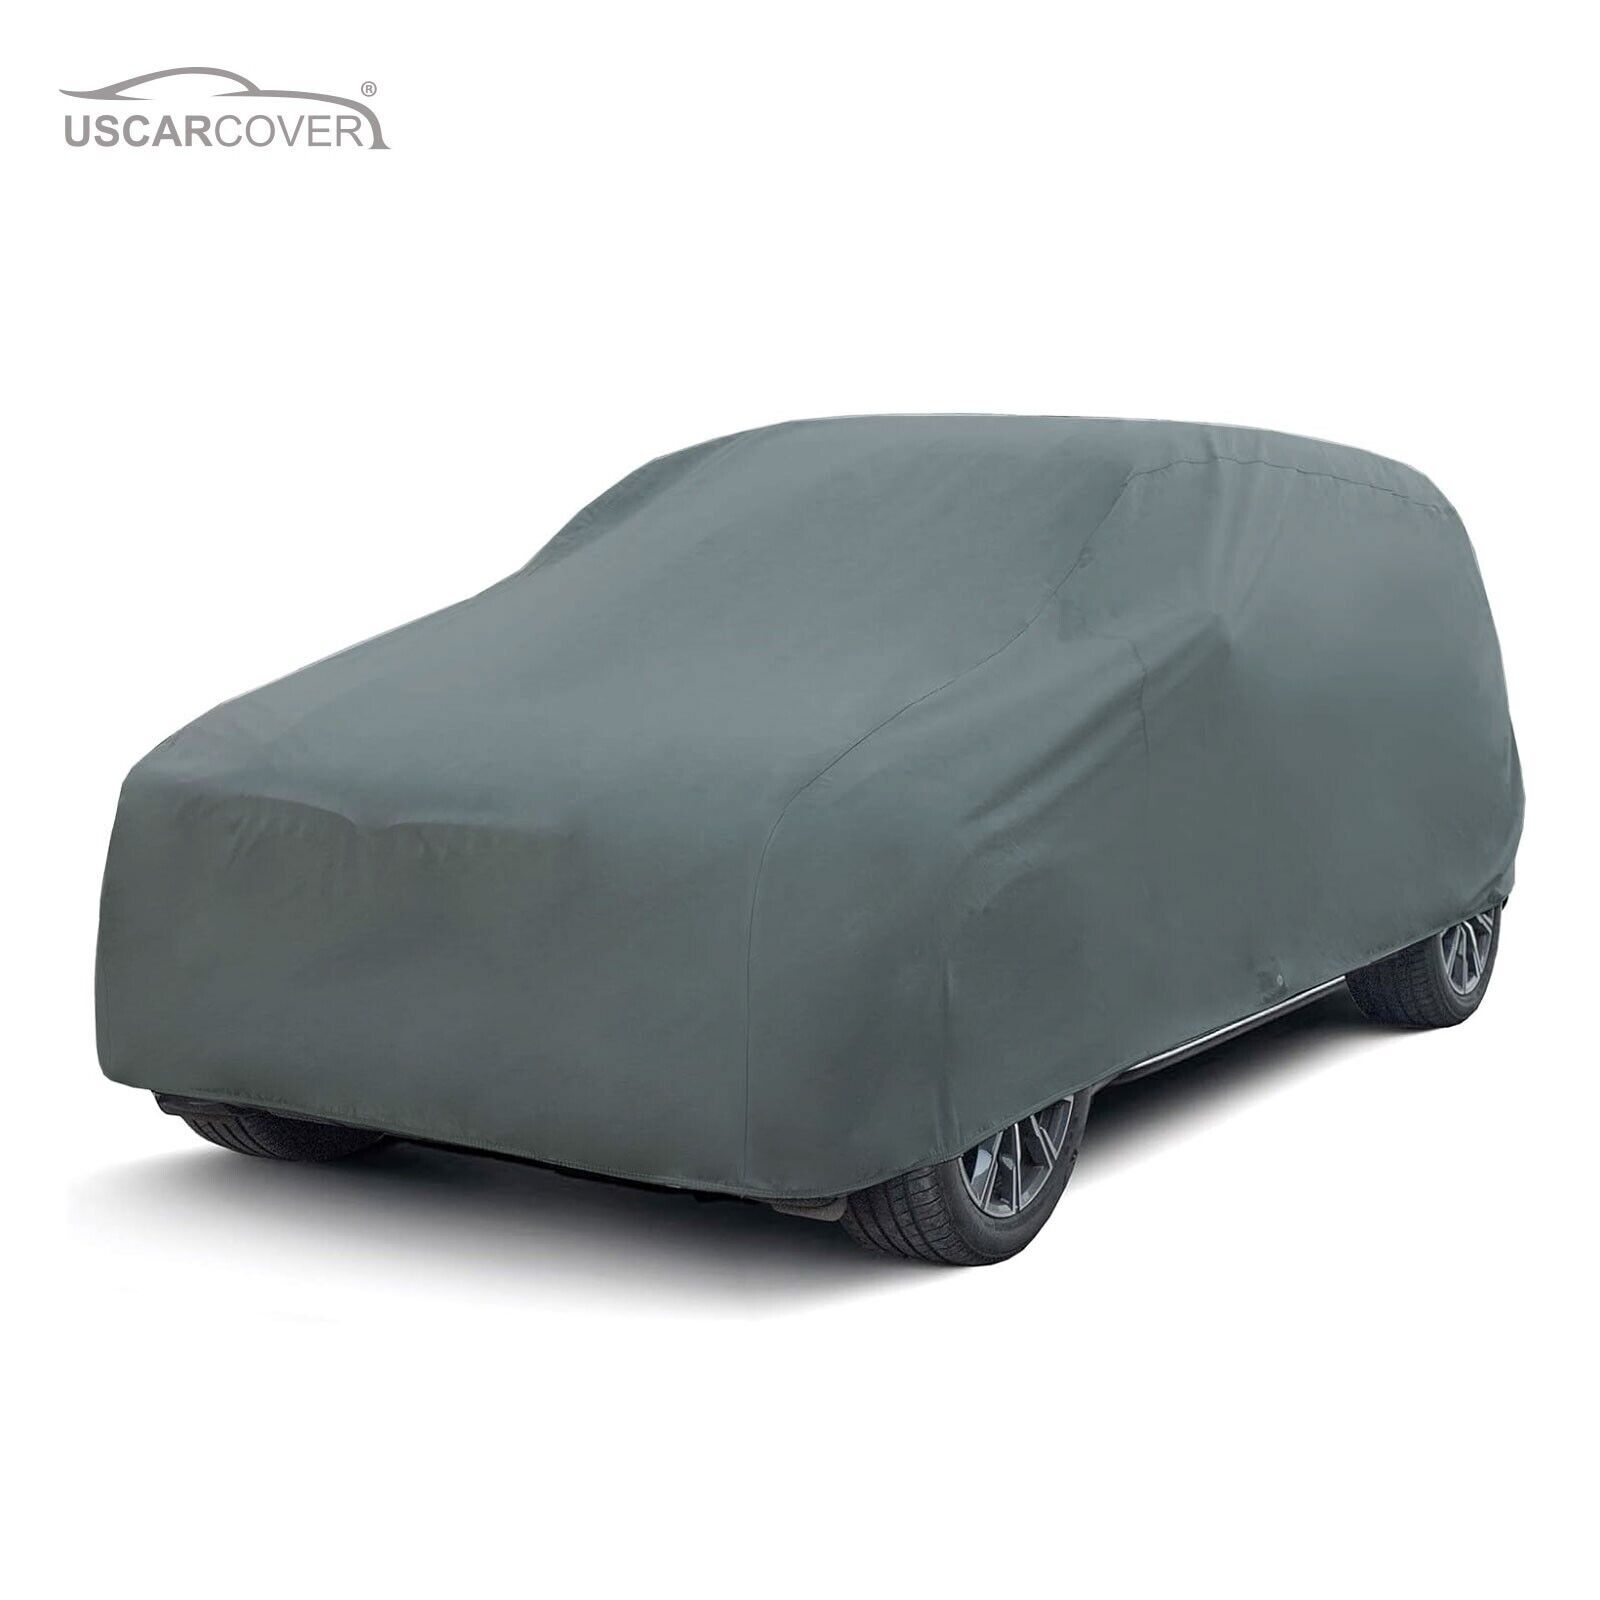 WeatherTec UHD 5 Layer Full SUV Car Cover for Chevrolet Tahoe 2000-2014